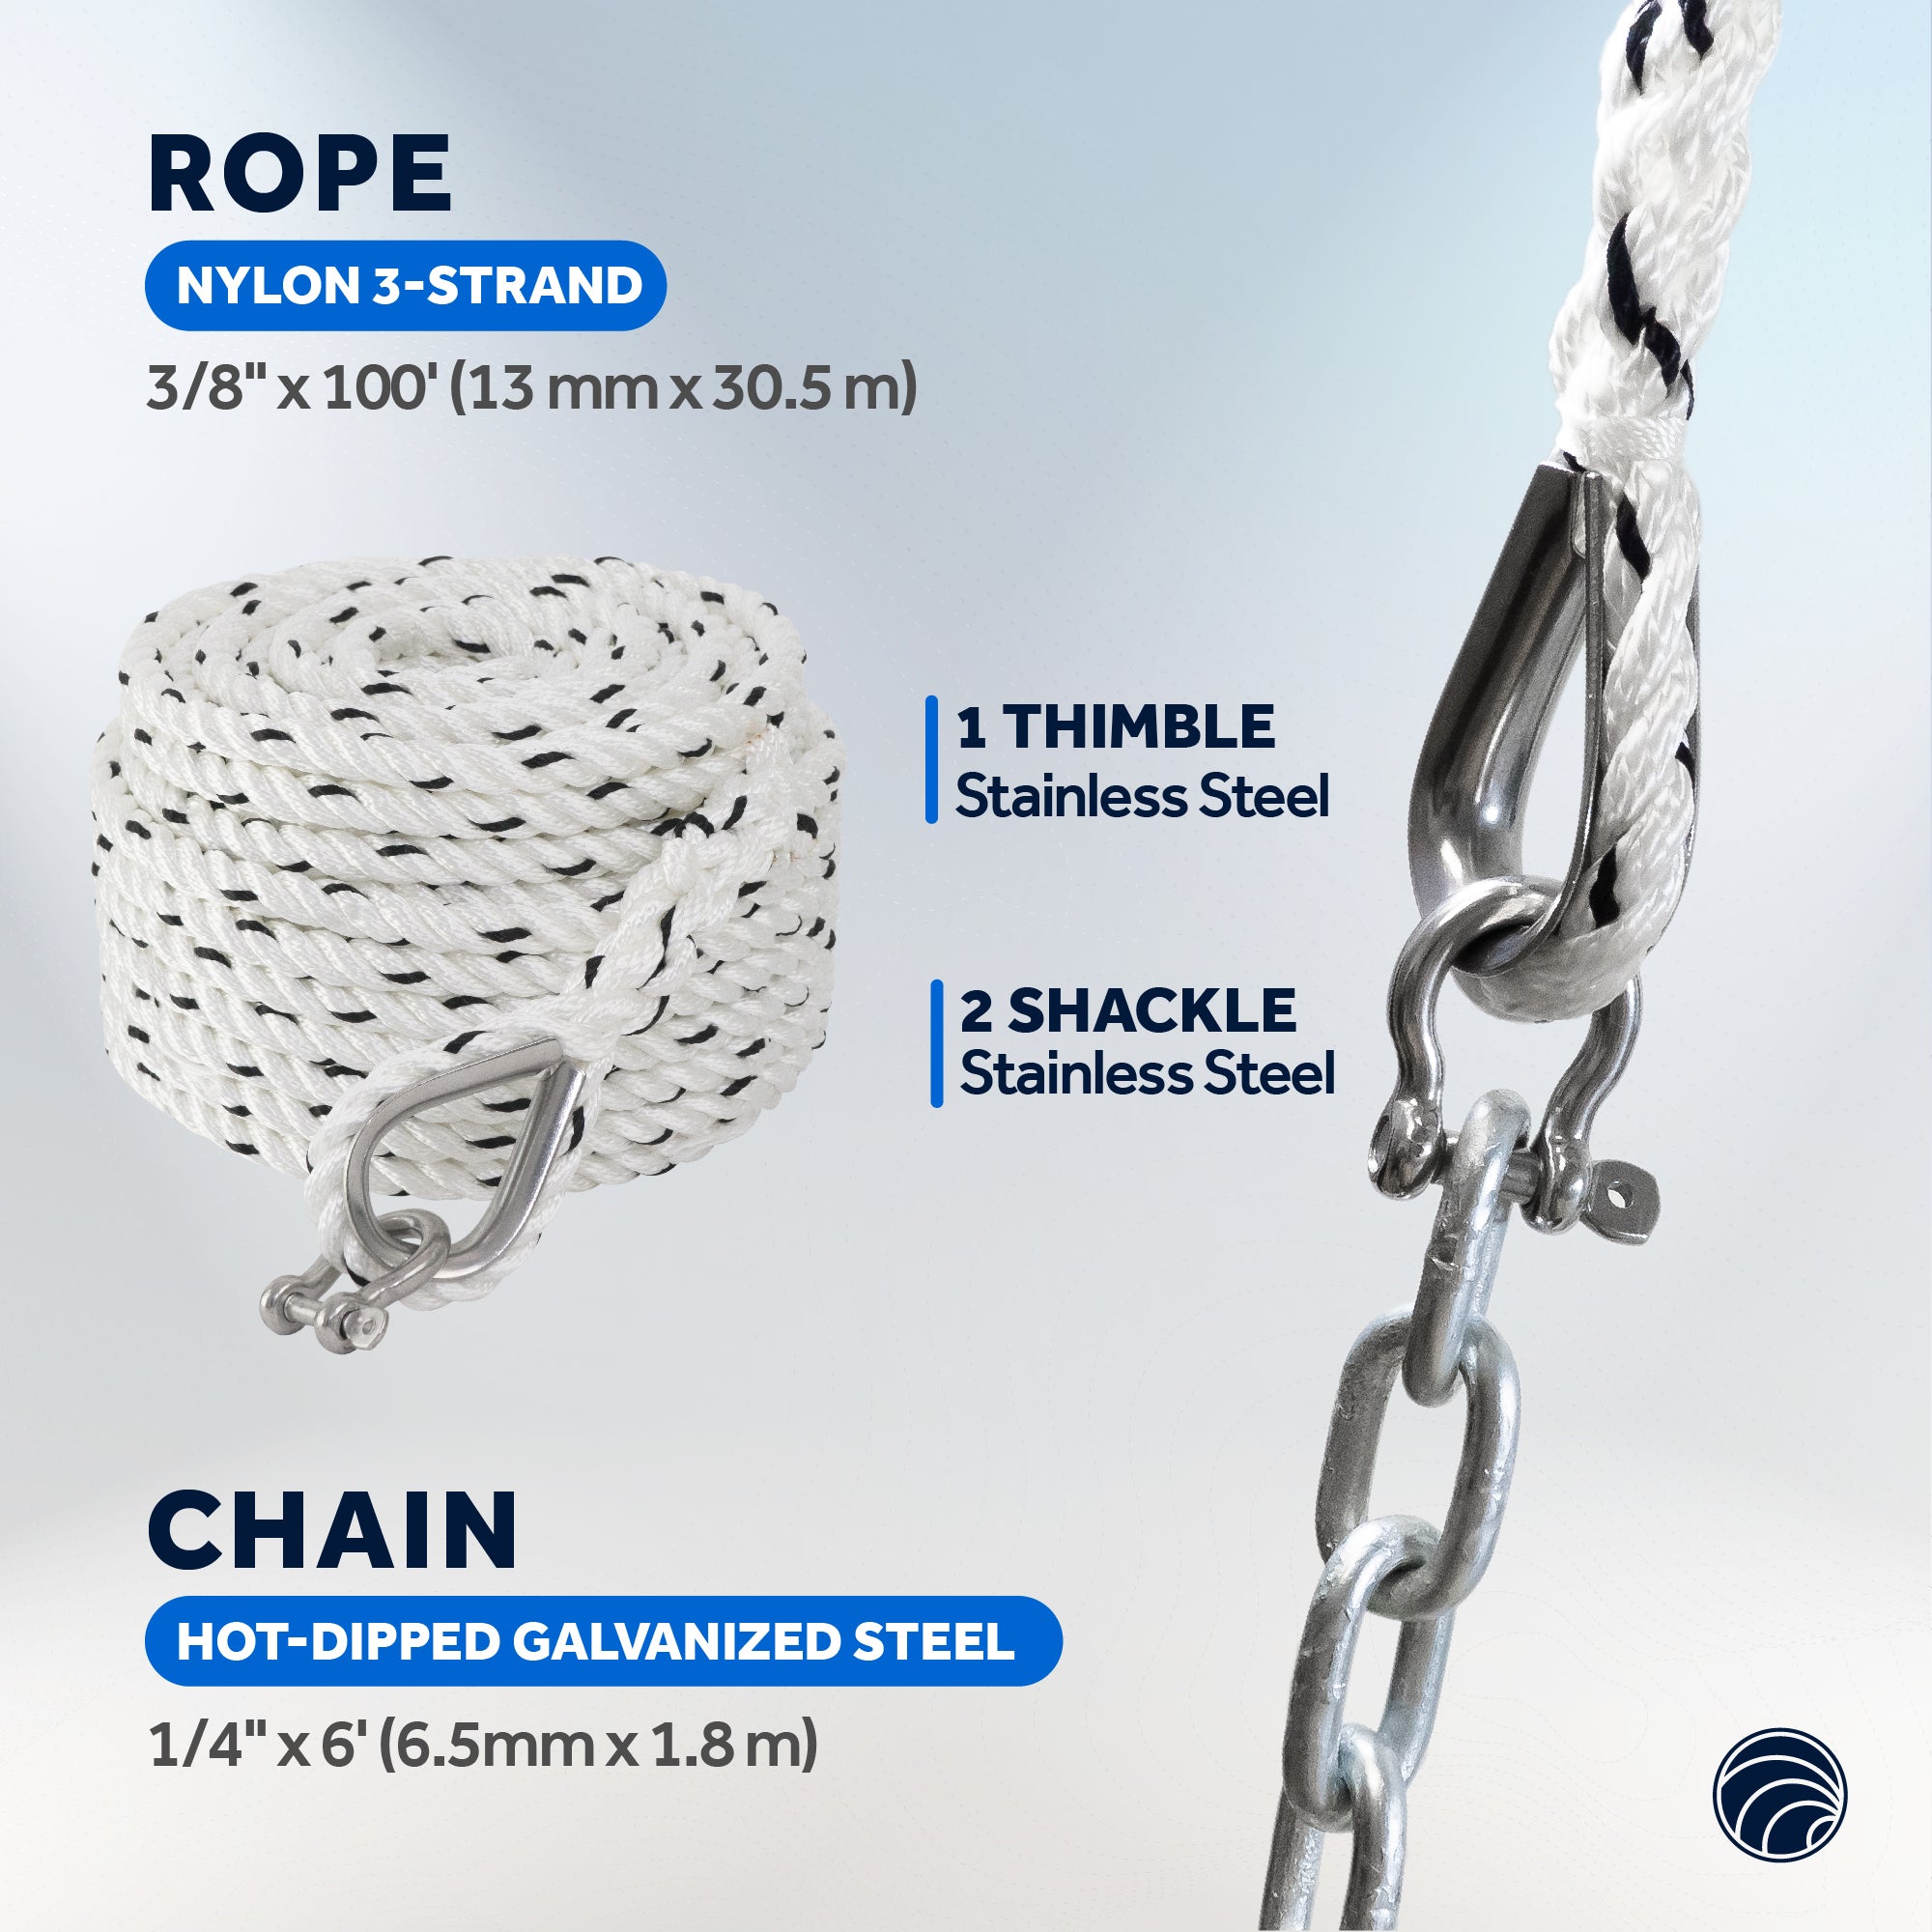 Boat Fluke Anchor Kit, 8 Lb Hot Dipped Galvanized, Rope, Chain and Shackle - FO4640